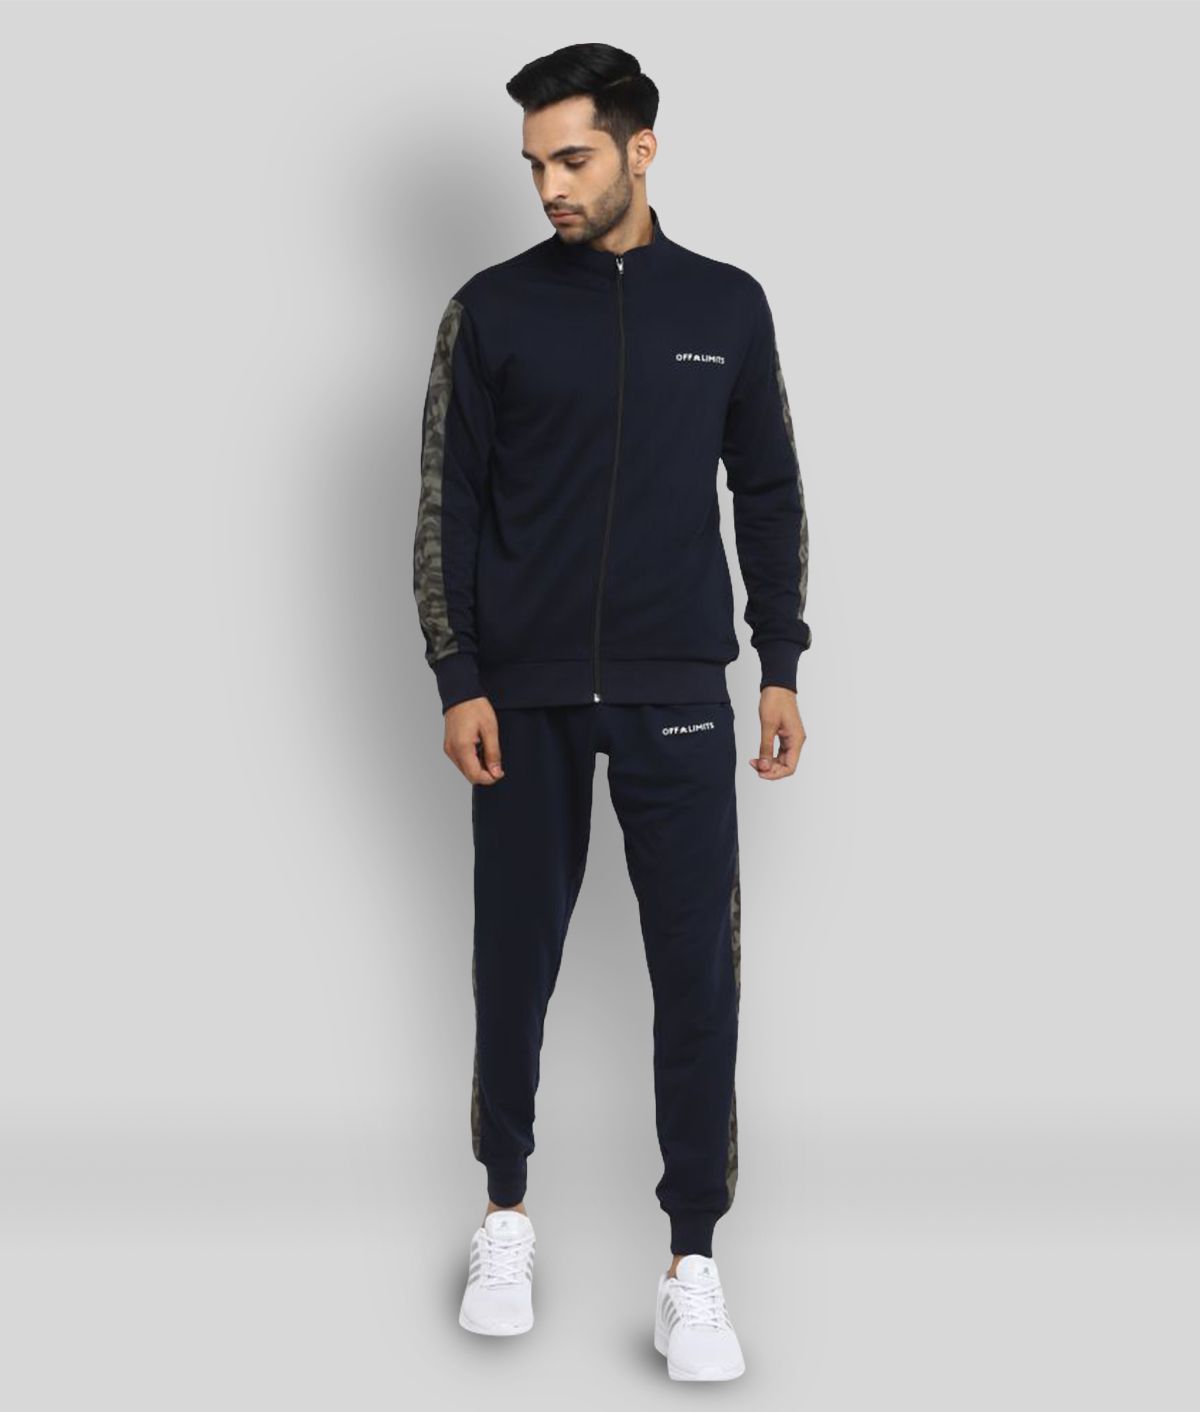 OFF LIMITS - Navy Blue Polyester Regular Fit Solid Men's Sports Tracksuit ( Pack of 1 )